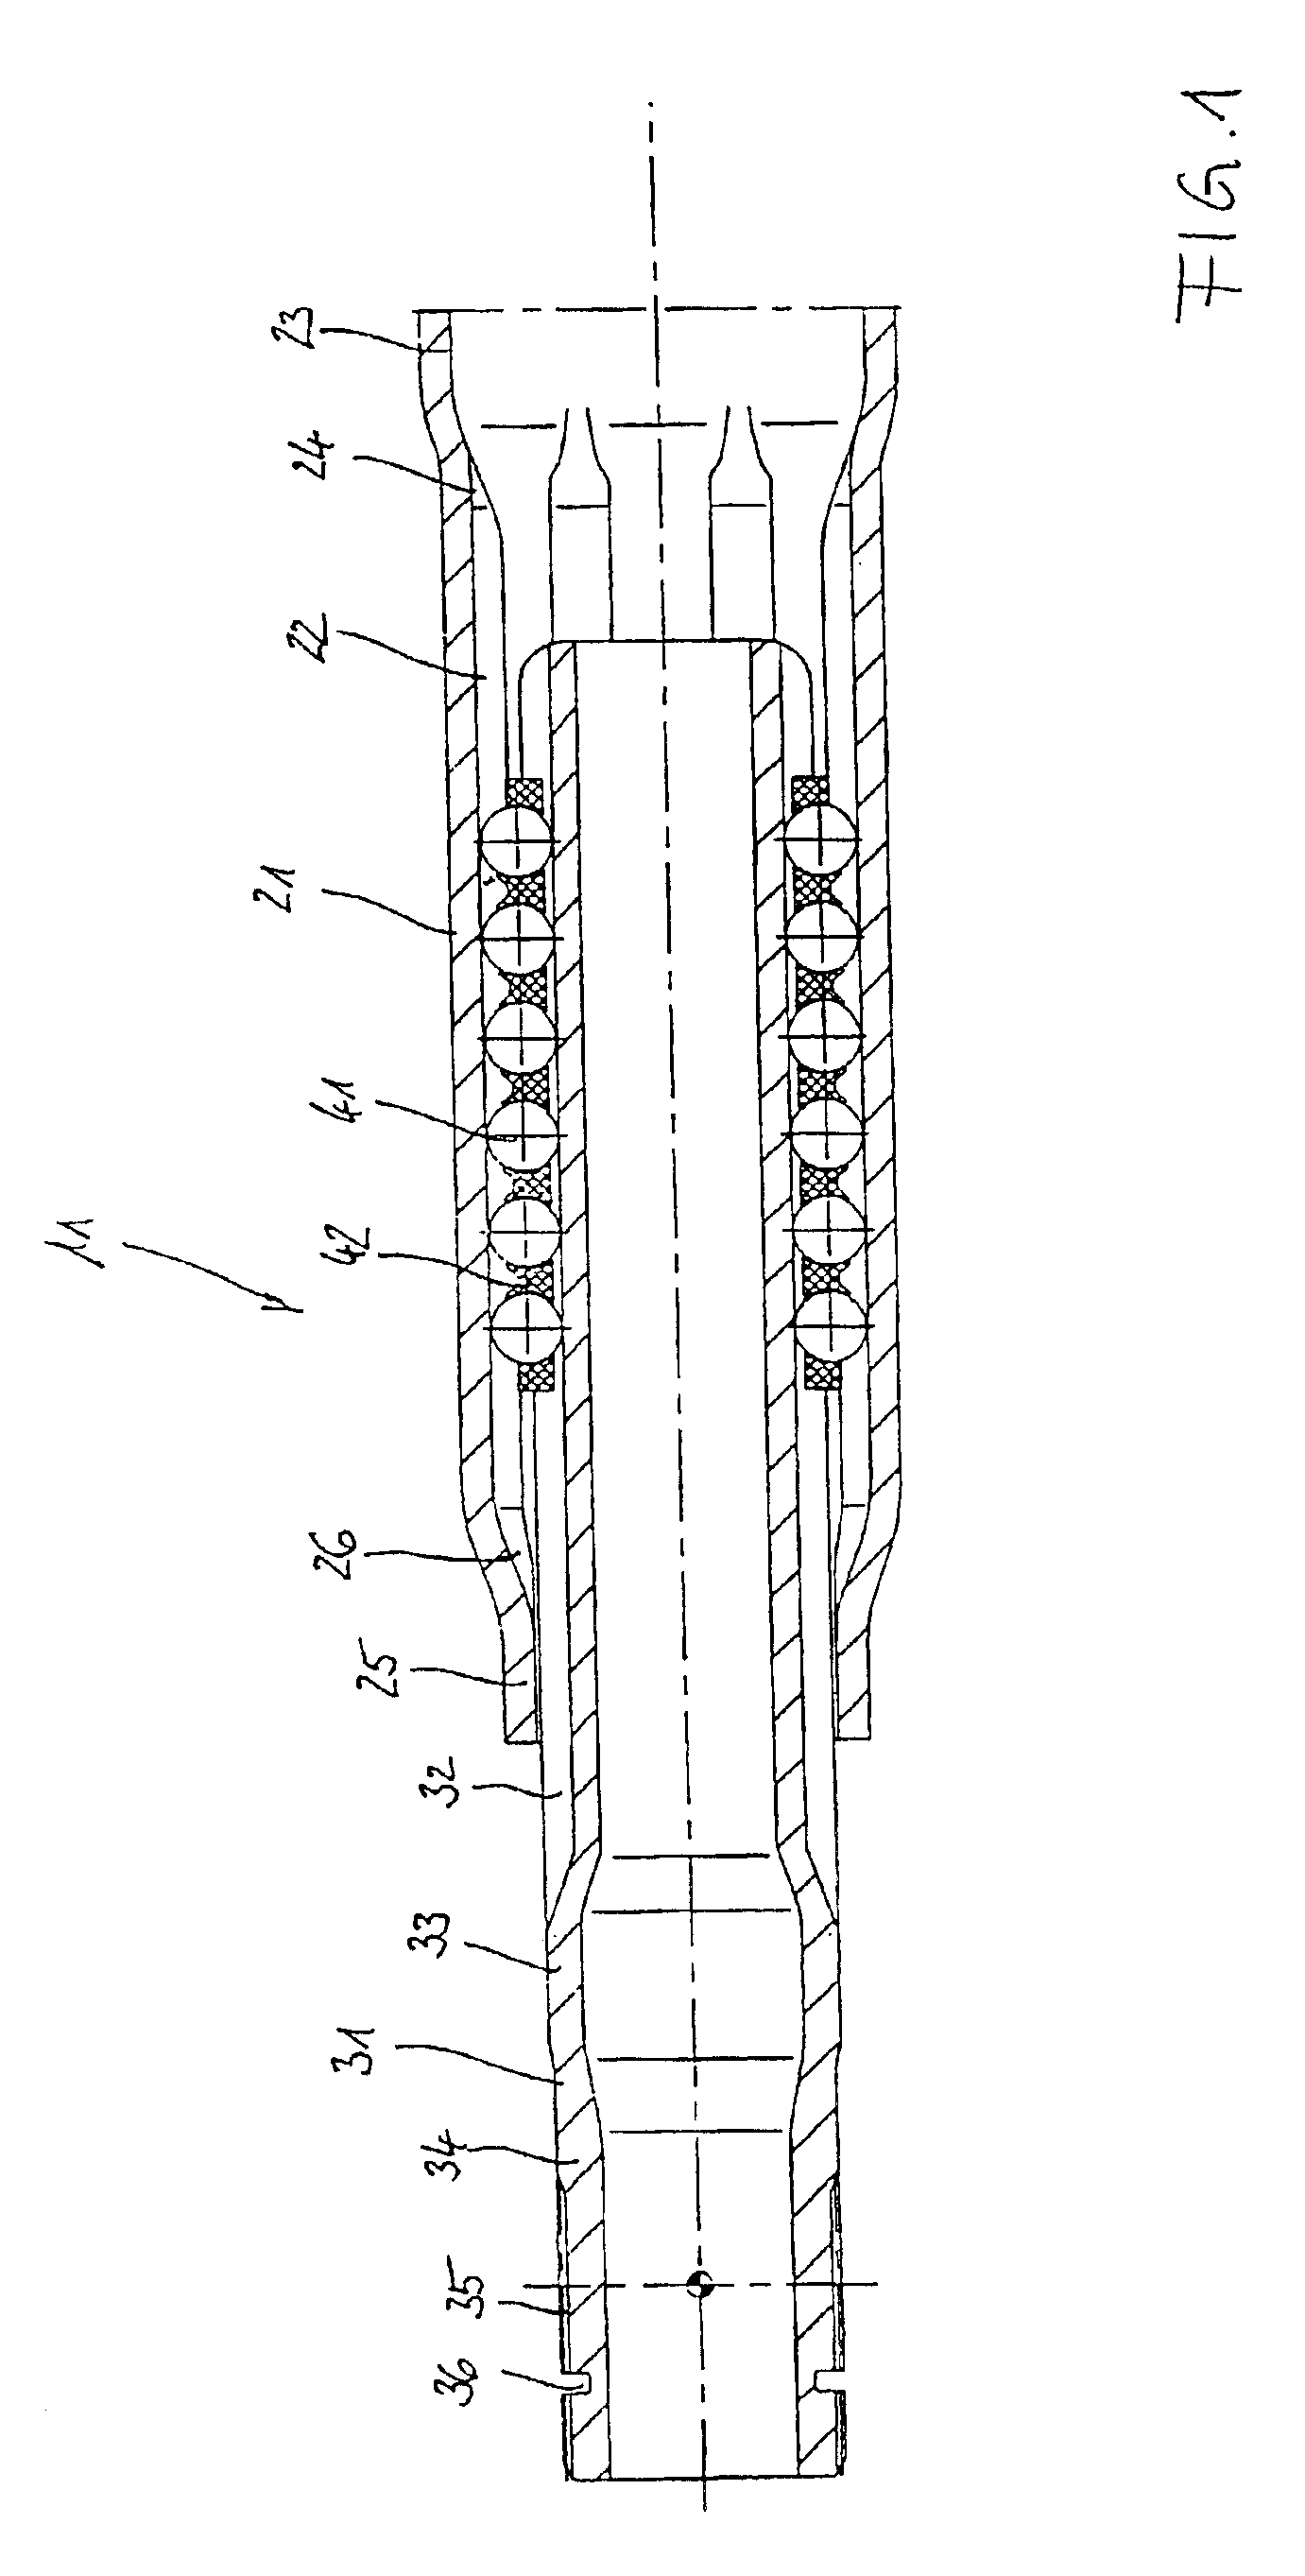 Longitudinal plunging unit with a hollow profiled journal